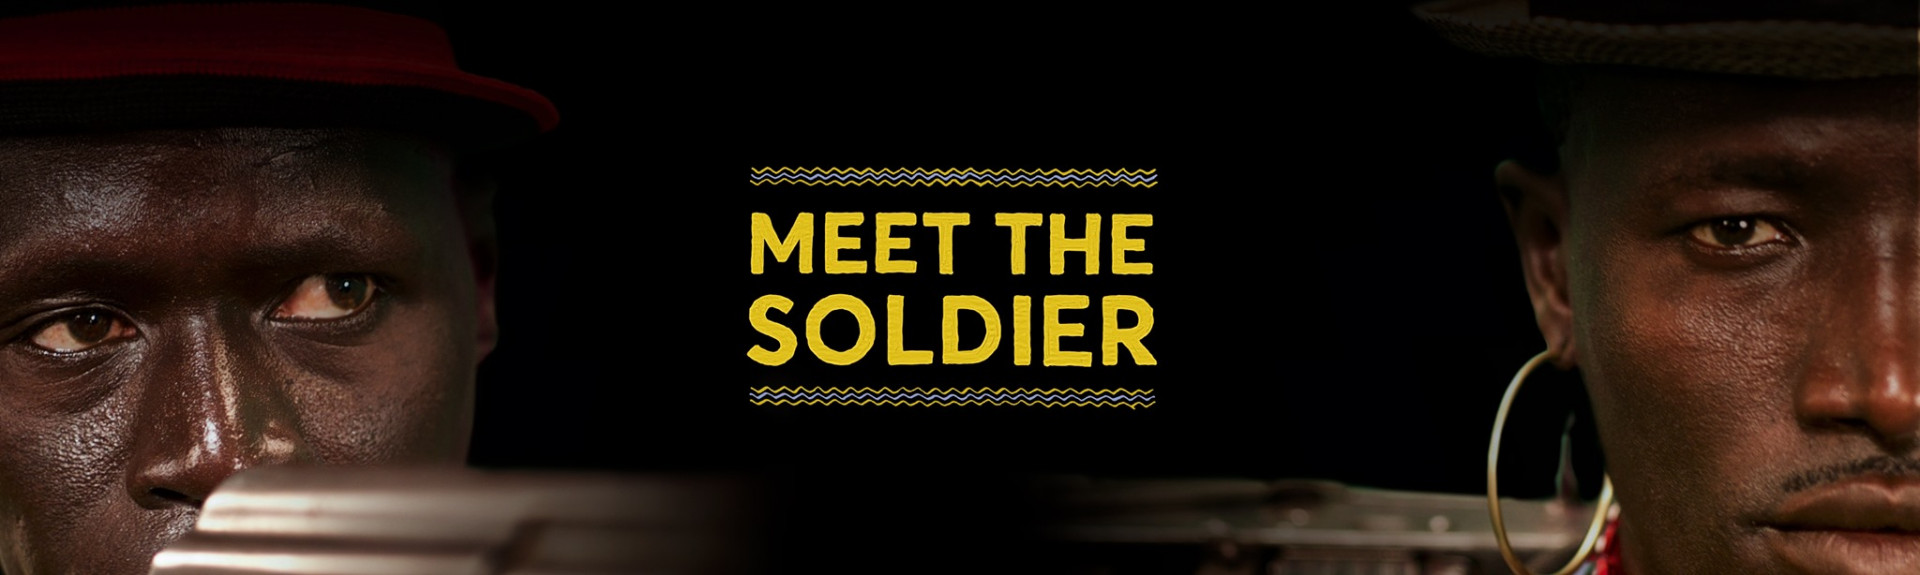 Meet the Soldier